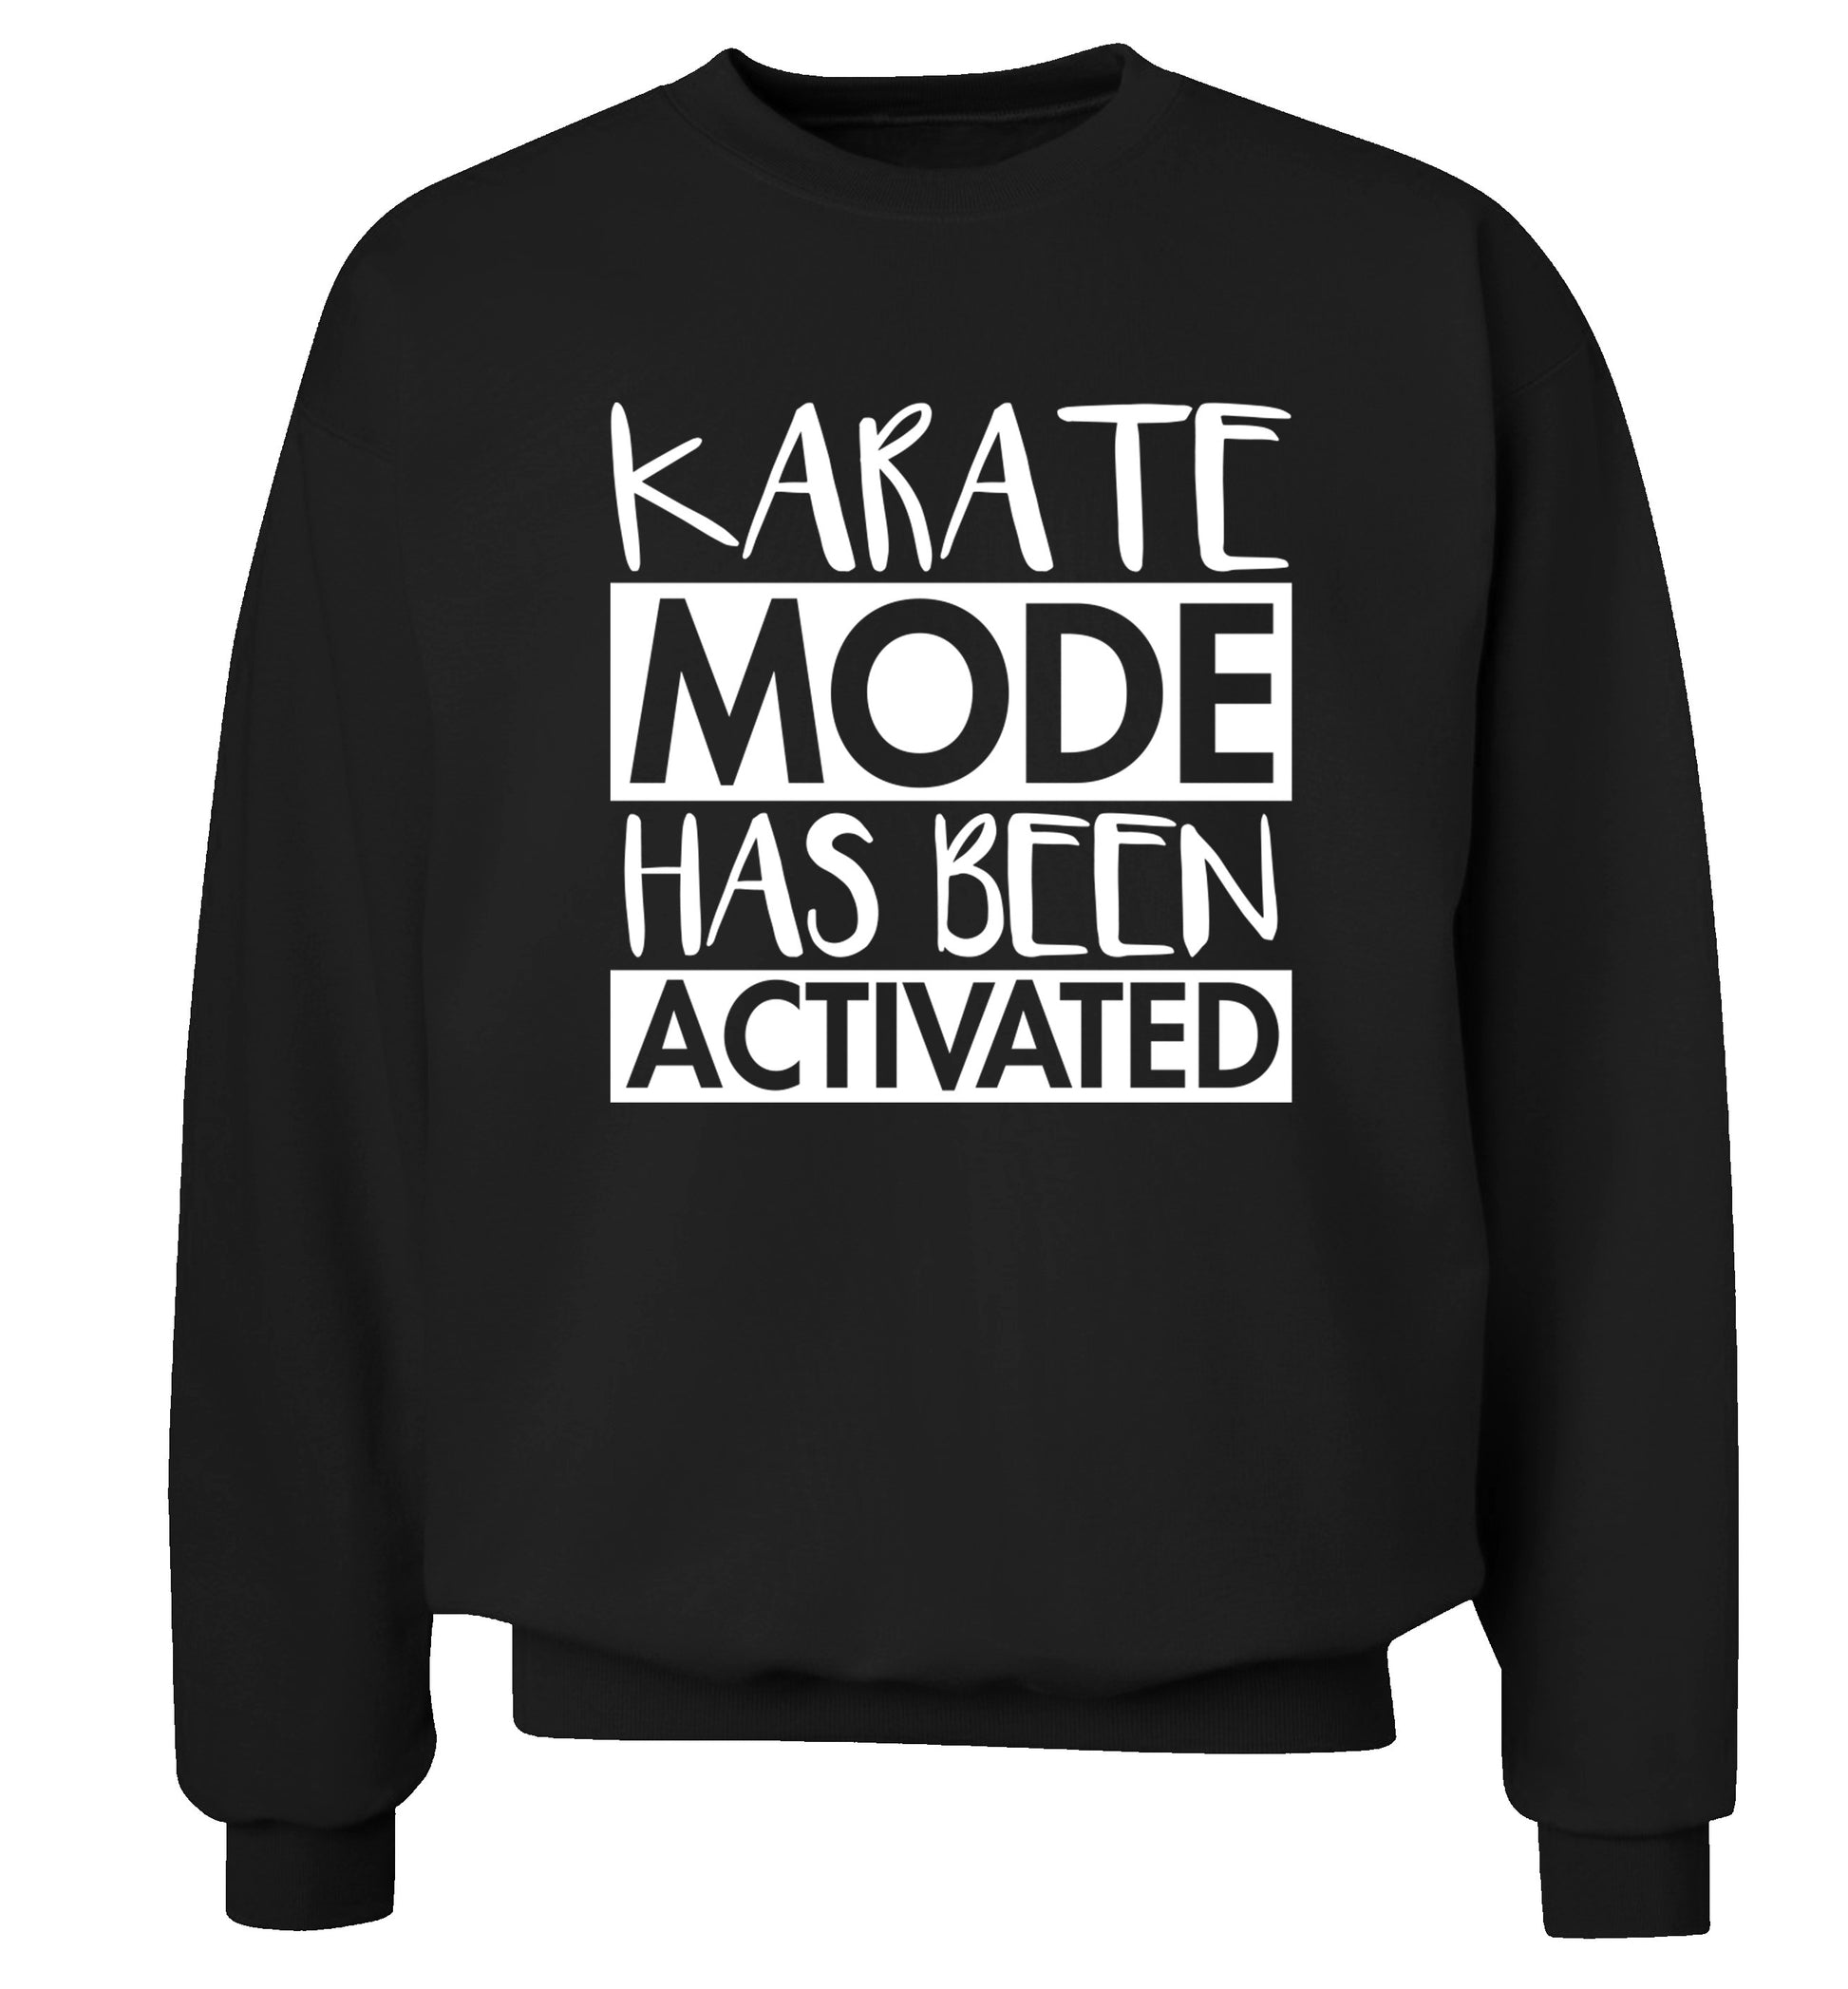 Karate mode activated Adult's unisex black Sweater 2XL